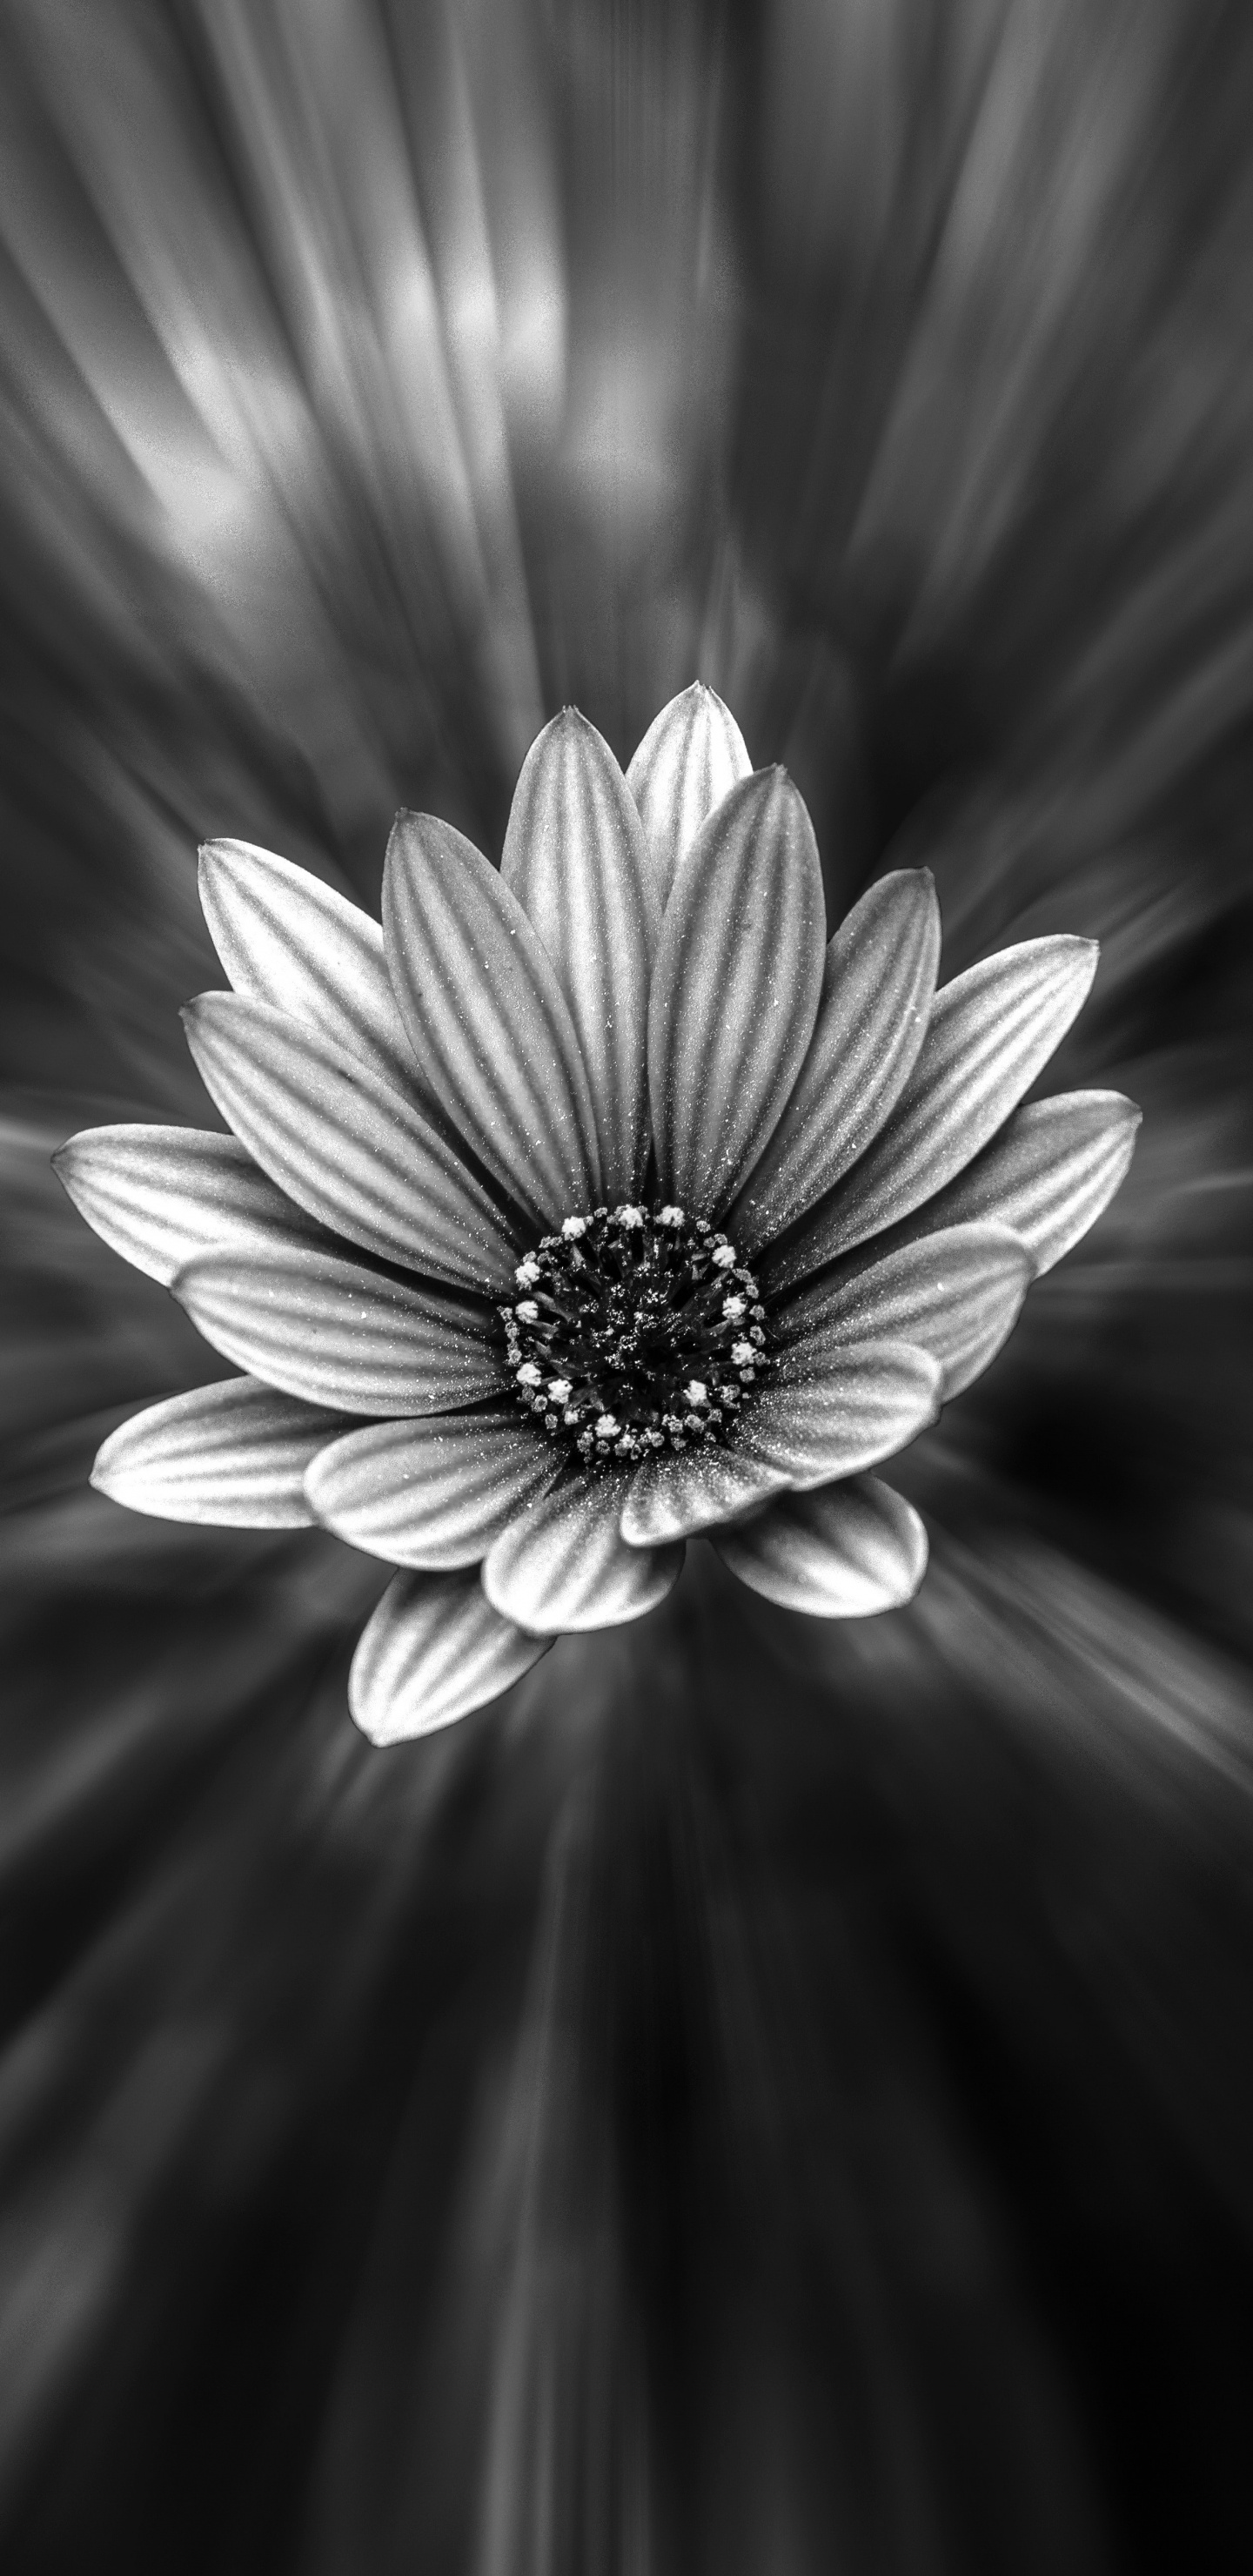 Grayscale Photo of a Flower. Wallpaper in 1440x2960 Resolution